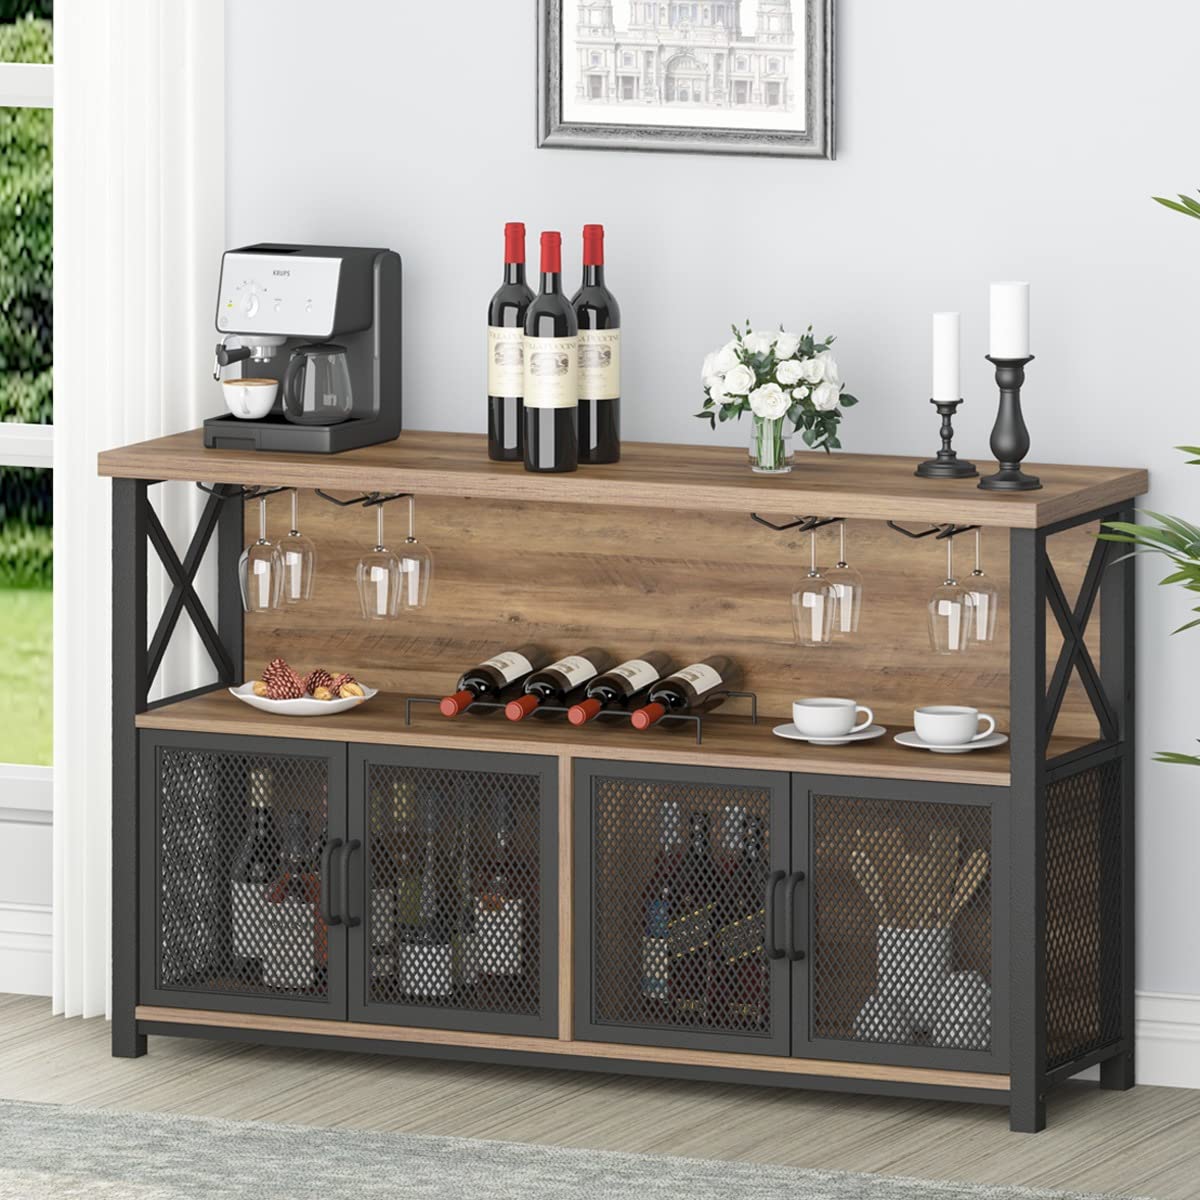 LVB Wine Bar cabinet, Industrial Sideboard Buffet cabinet, coffee Bar cabinet for Liquor and glasses, Farmhouse Metal Wood Liquo